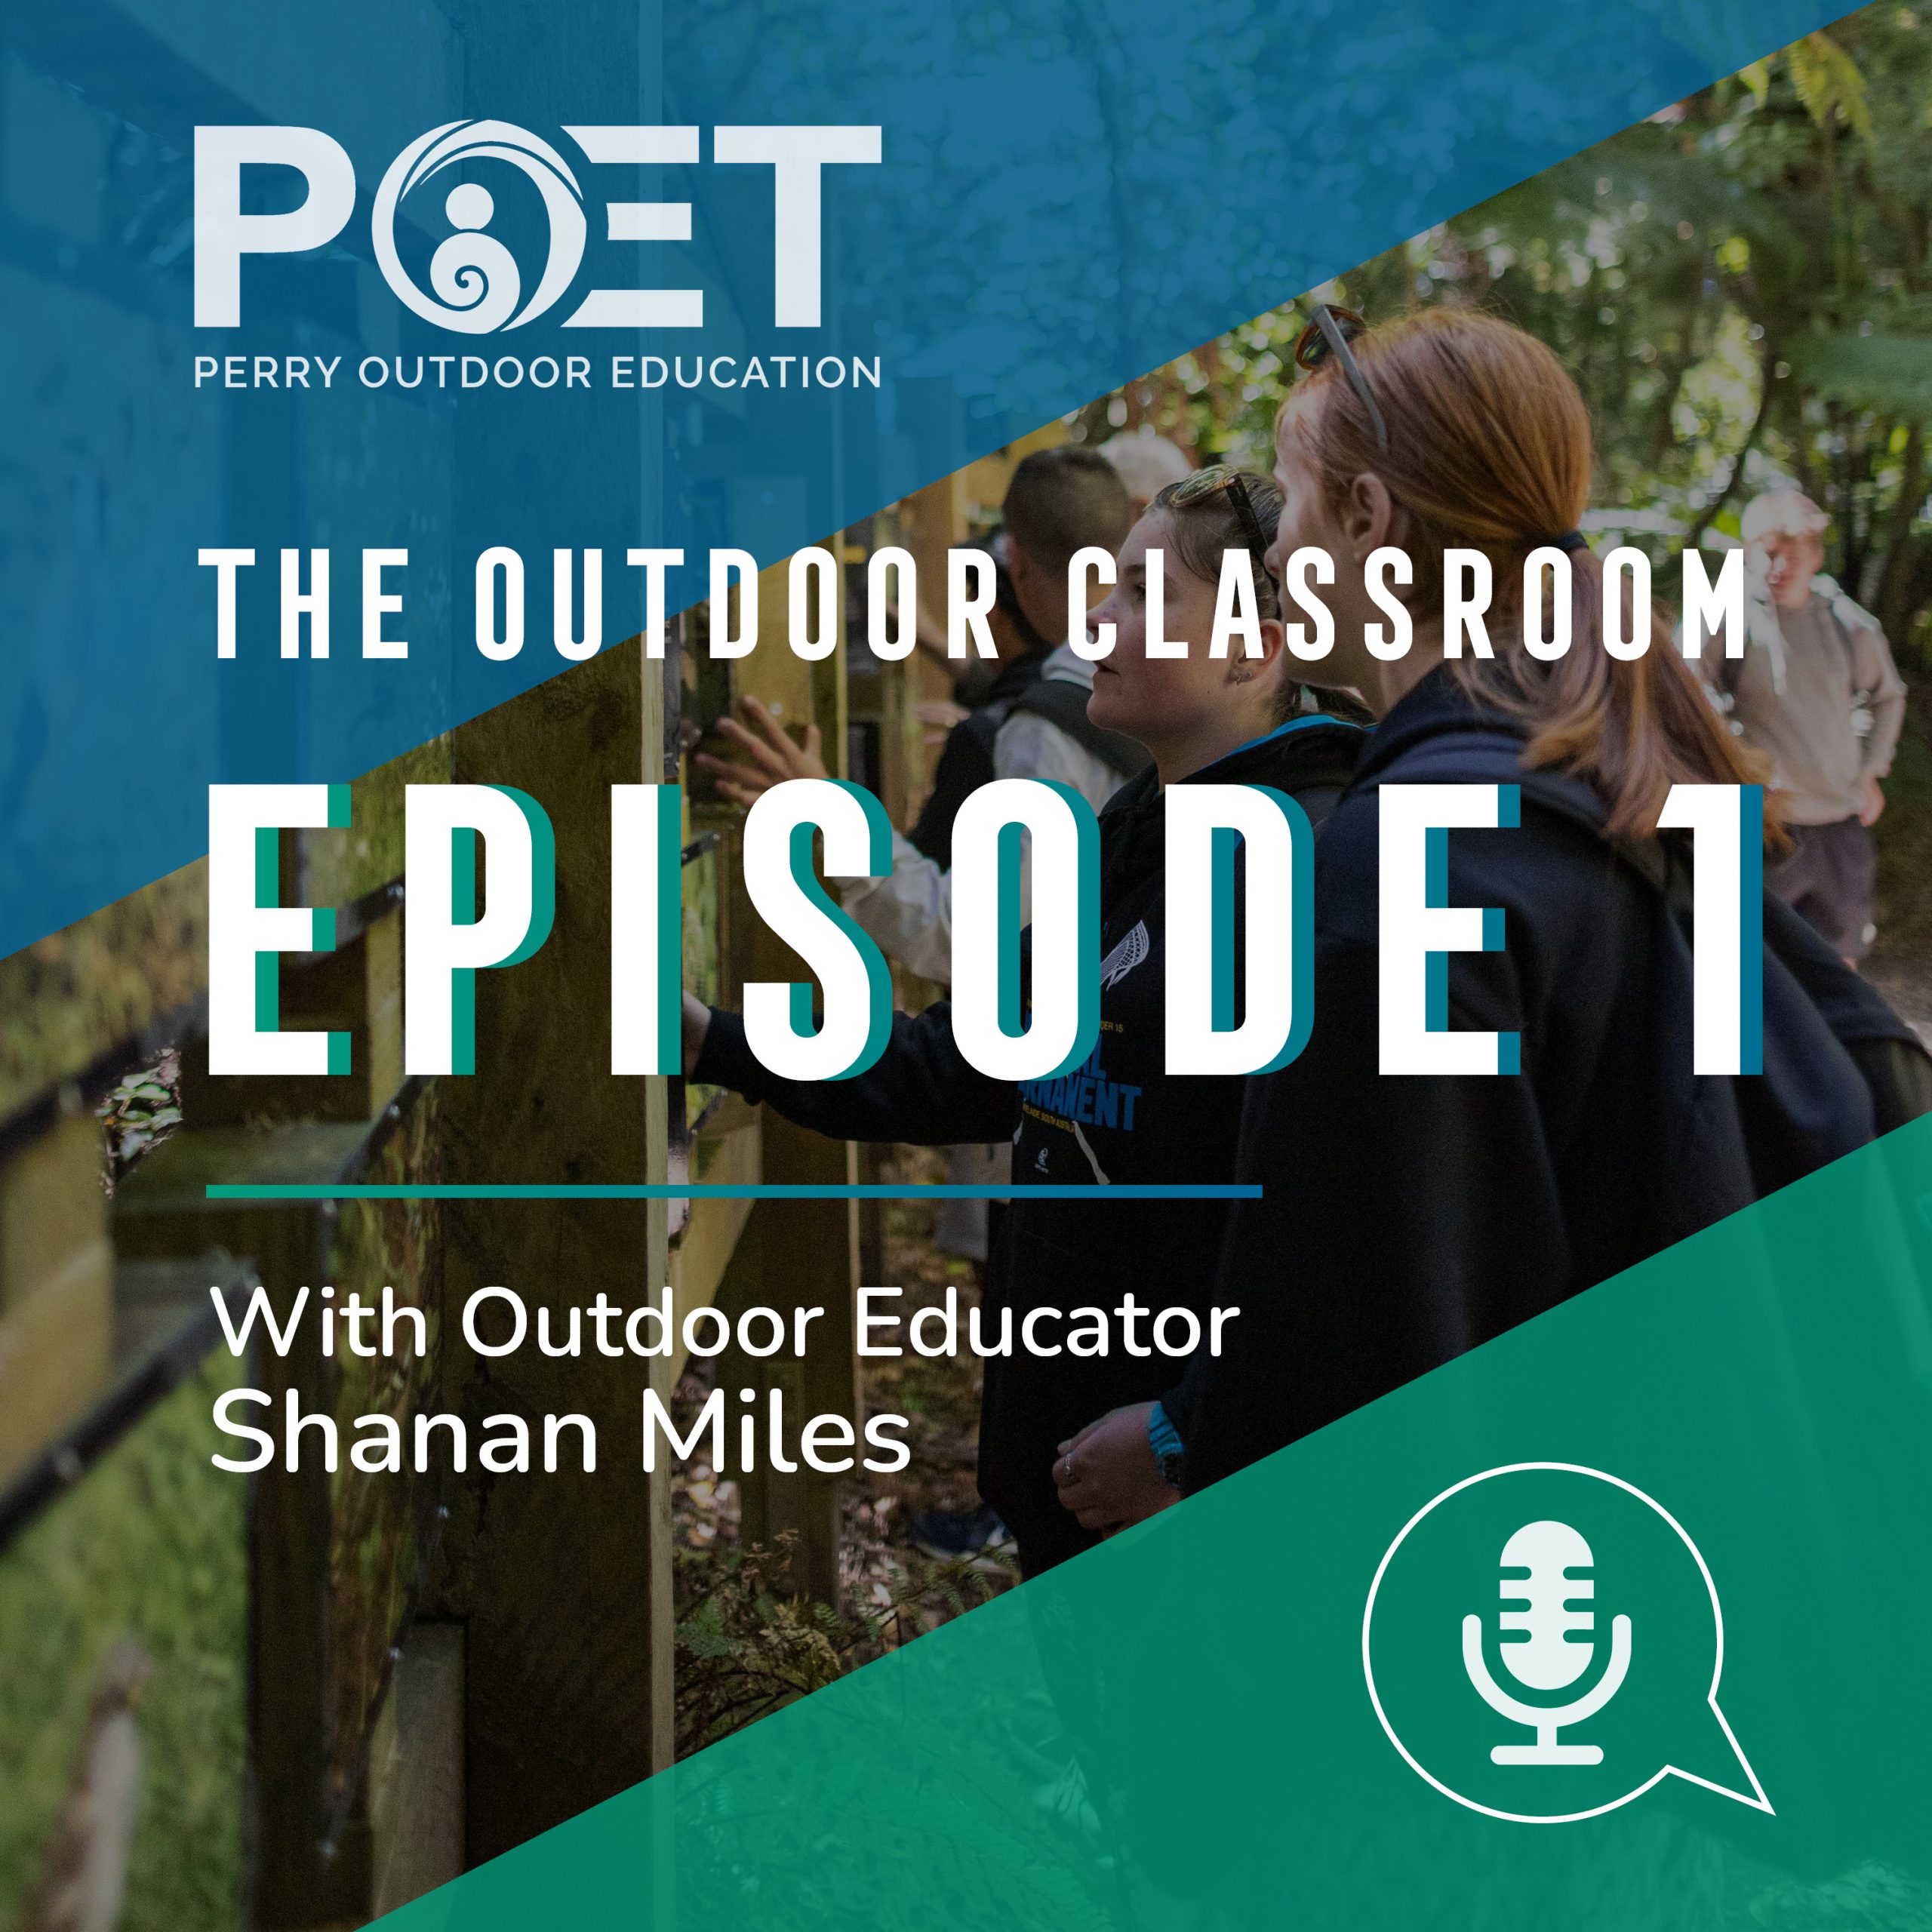 Episode 1 of the Outdoor Classroom Podcast